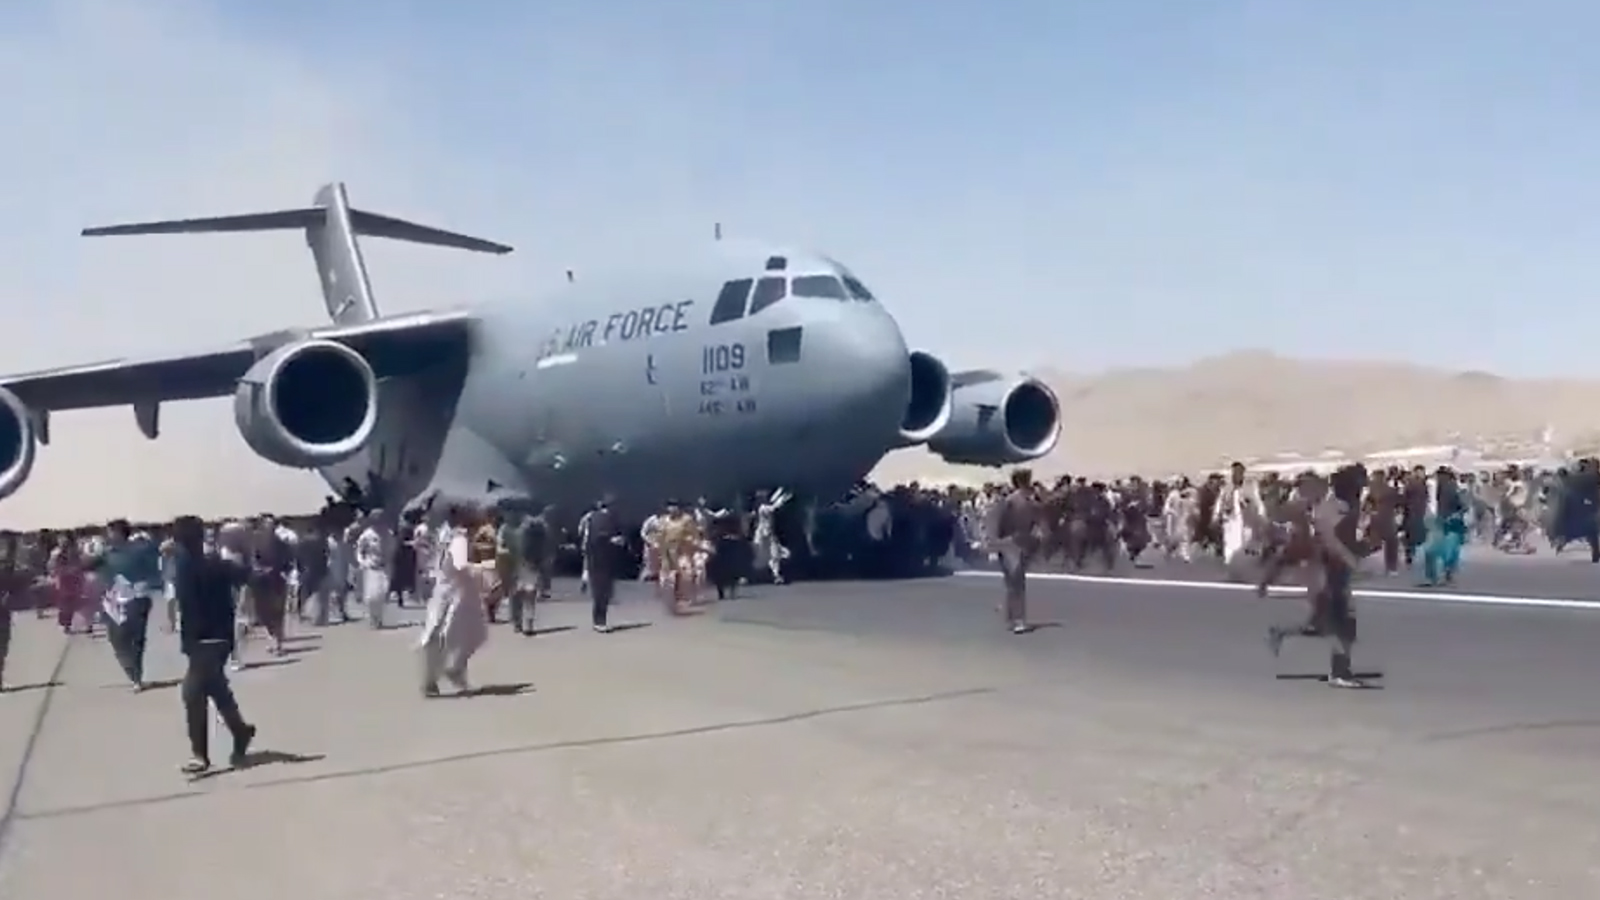 Hundreds of people run alongside a U.S. Air Force C-17 transport plane as it moves down a runway of the international airport, in Kabul, Afghanistan, Aug. 16, 2021. Thousands of Afghans rushed onto the tarmac at the airport, attempting to flee the Taliban. Video screengrab via Twitter/@Mukhtarwafayee